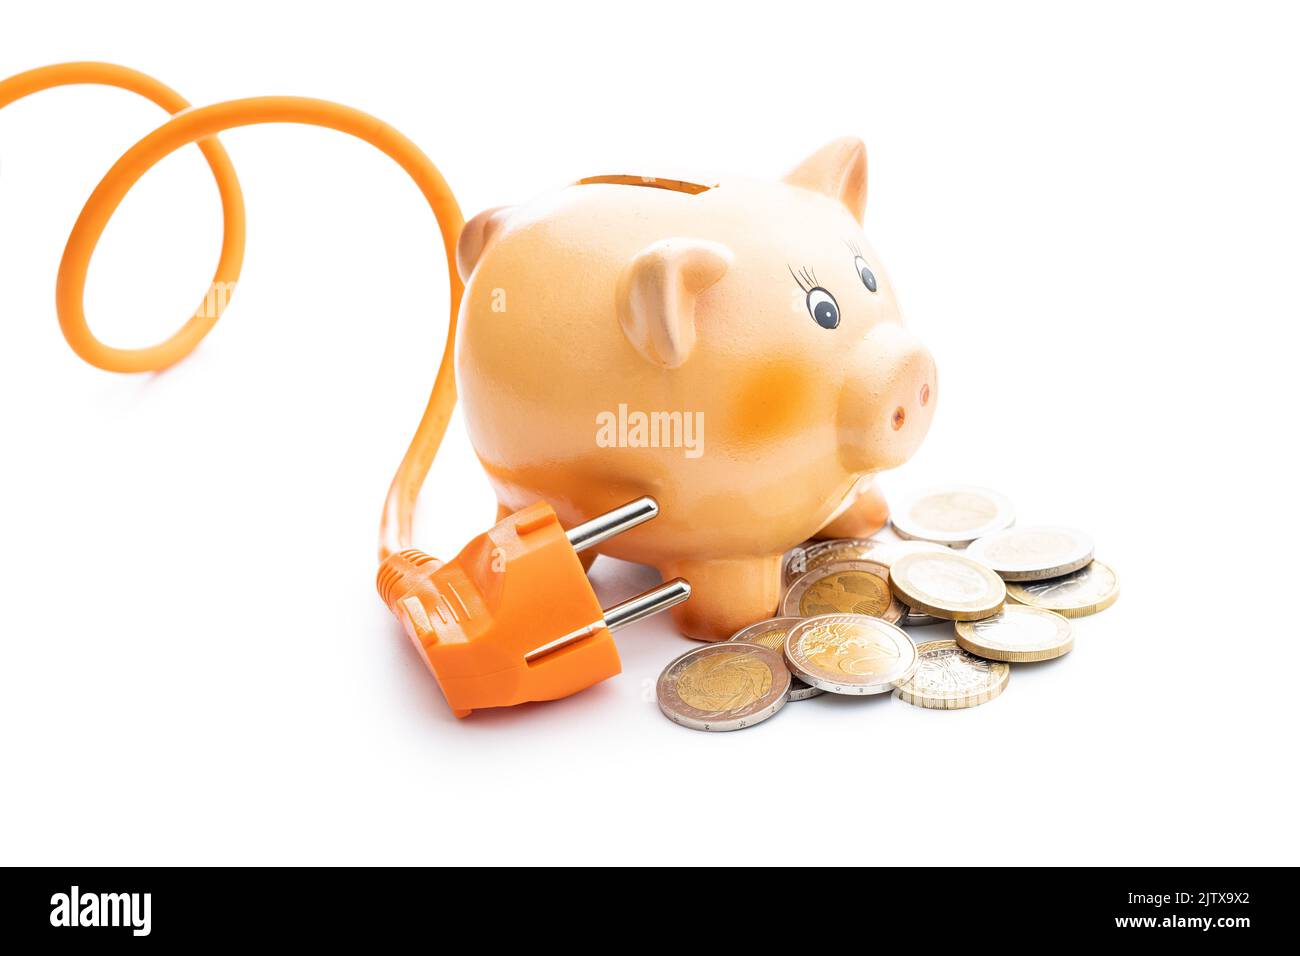 Orange electric plug,coins and piggy bank isolated on the white background. Concept of increasing electricity prices. Stock Photo